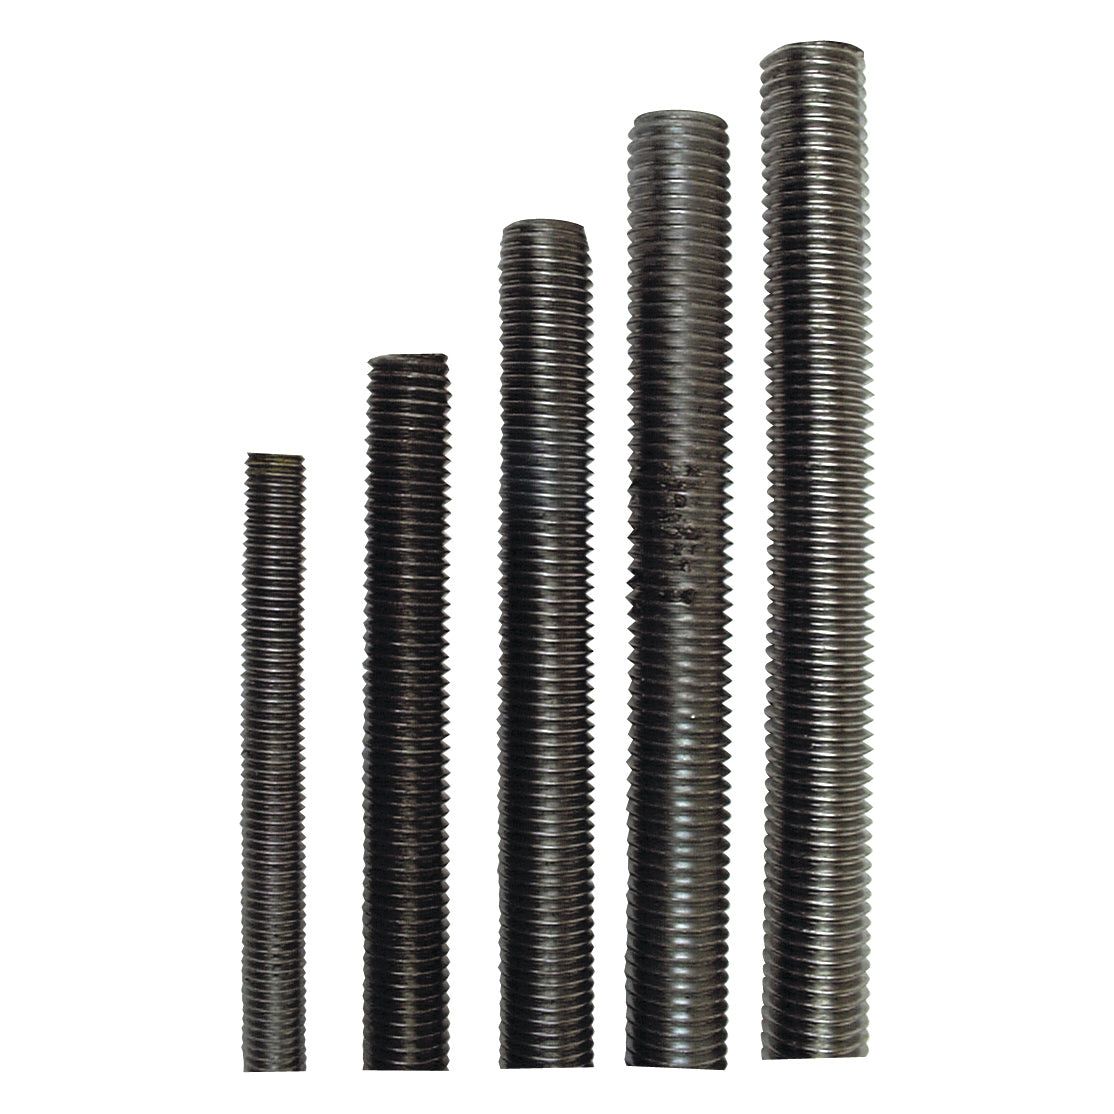 Metric Threaded Bar, Size:⌀14mm, Length: 1M, Tensile strength: 8.8.
 - S.8814 - Farming Parts